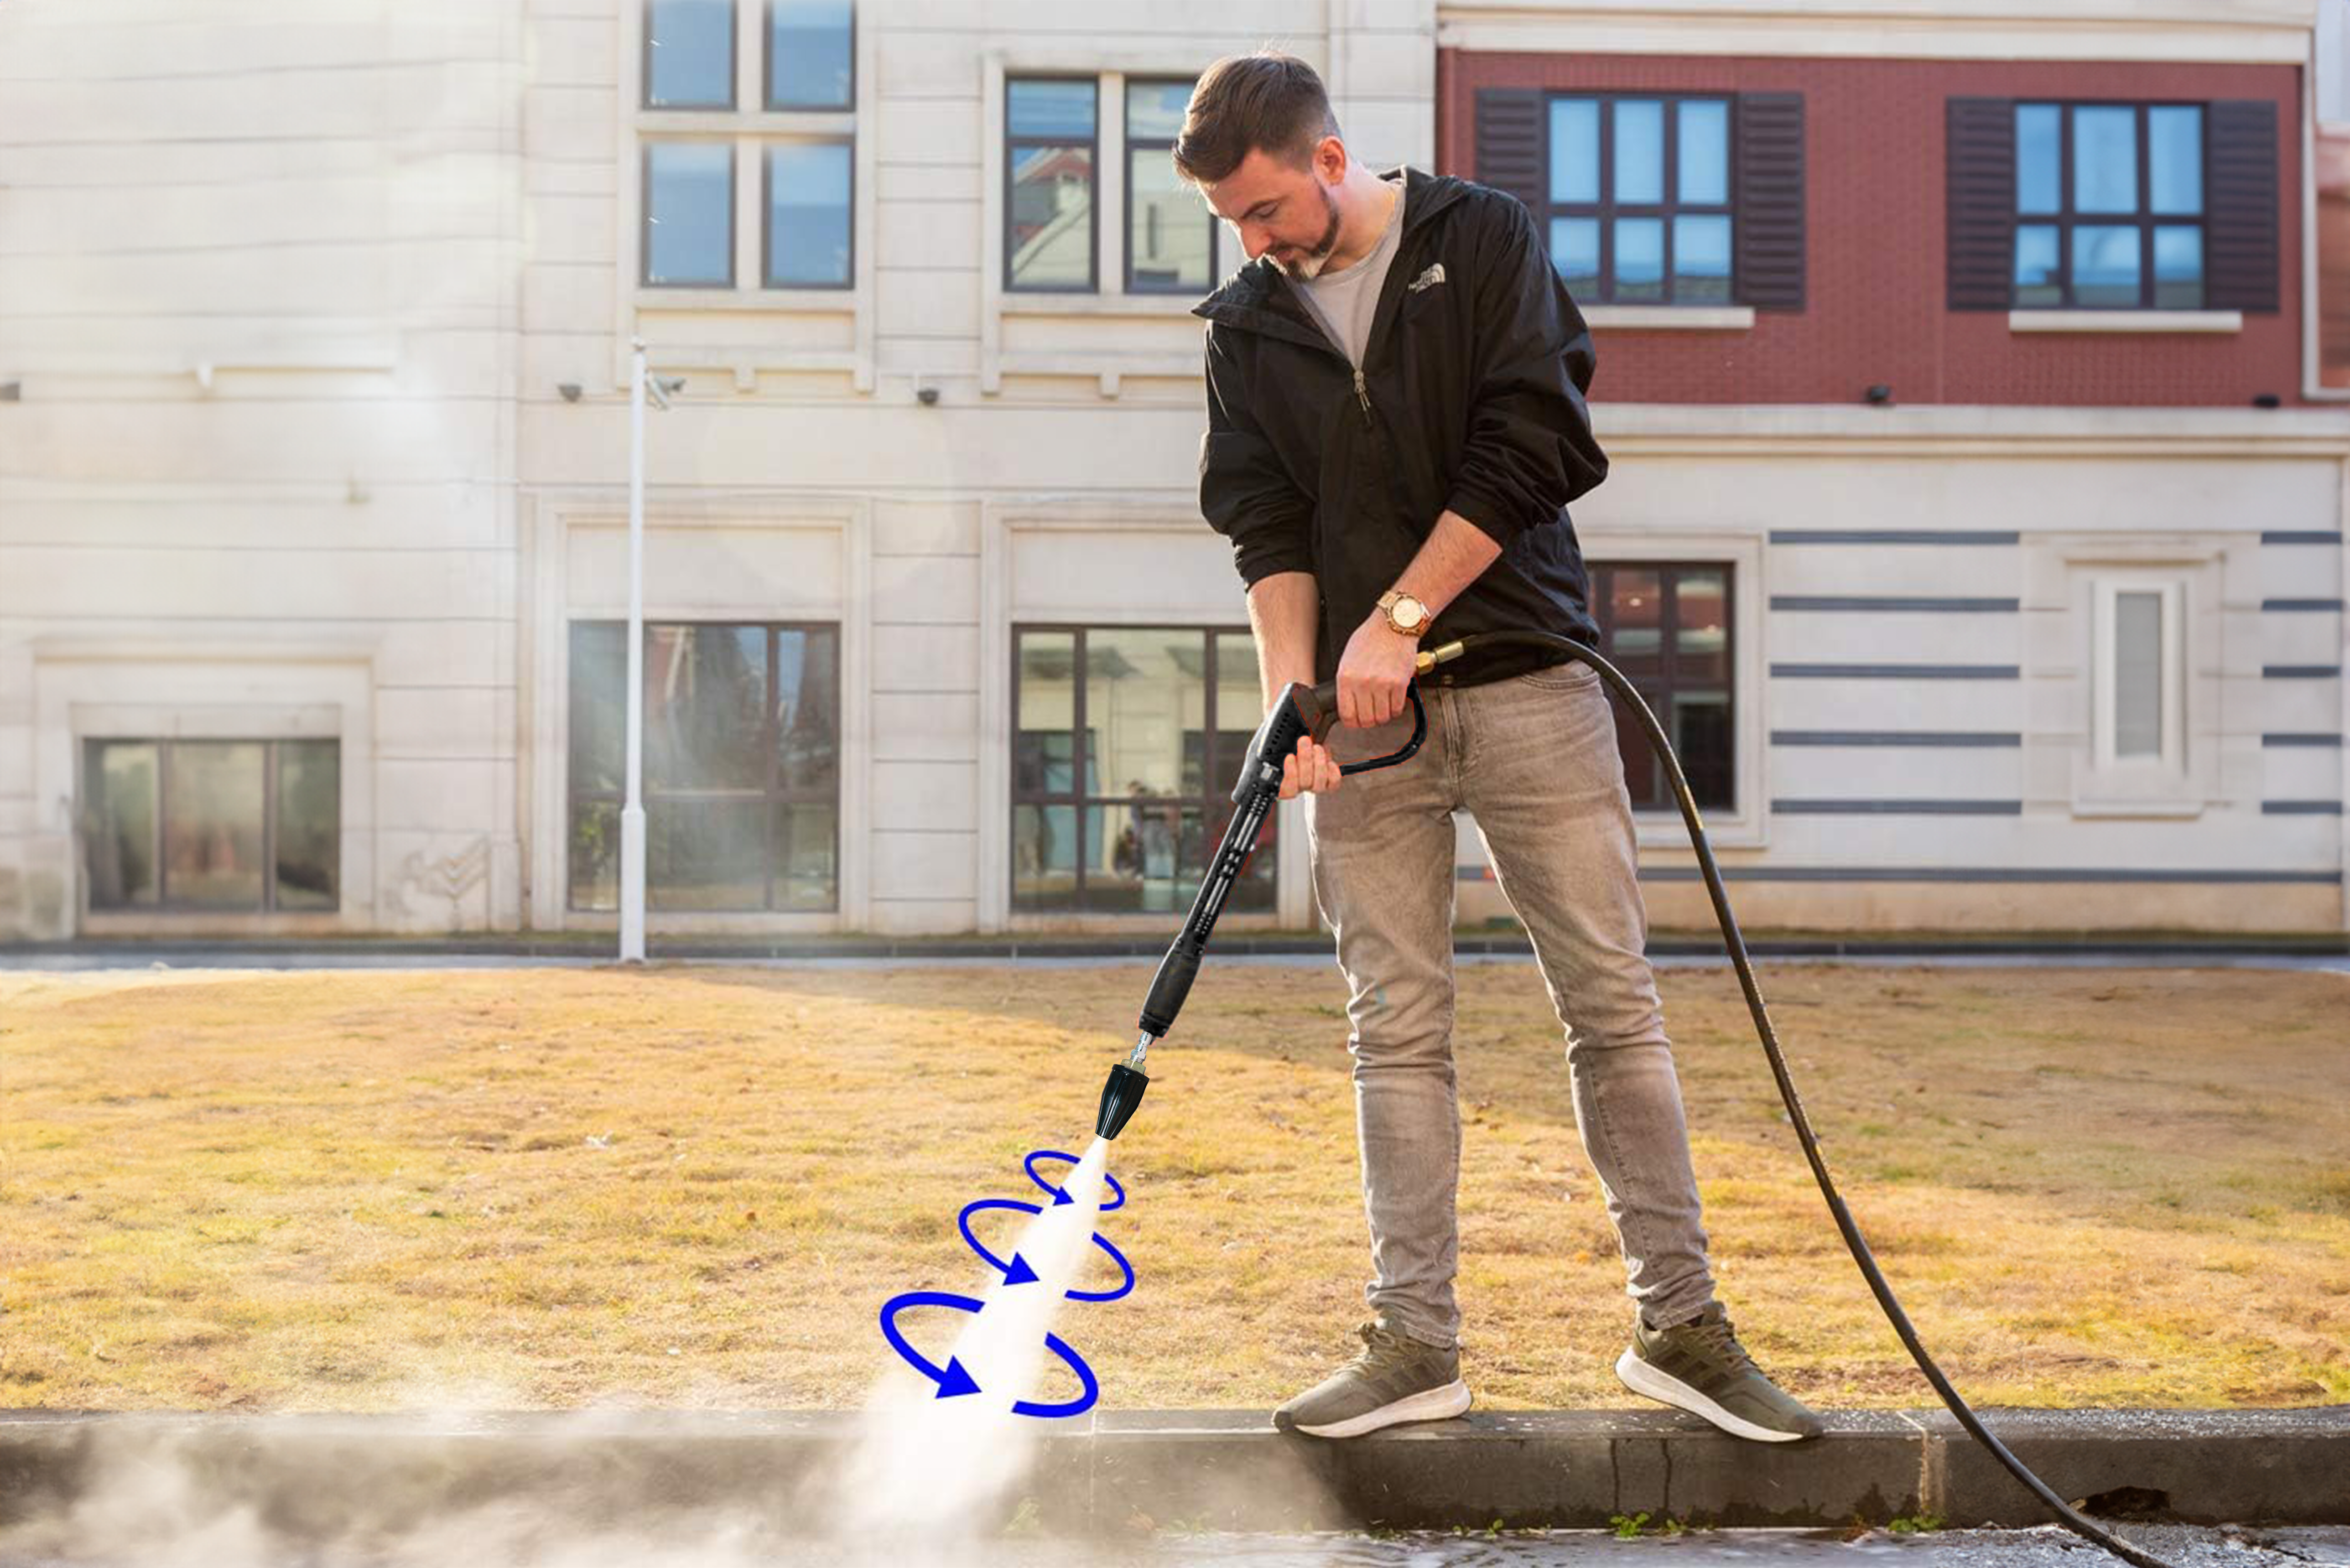 5 Reasons Your Pressure Washer Needs a Turbo Nozzle Upgrade